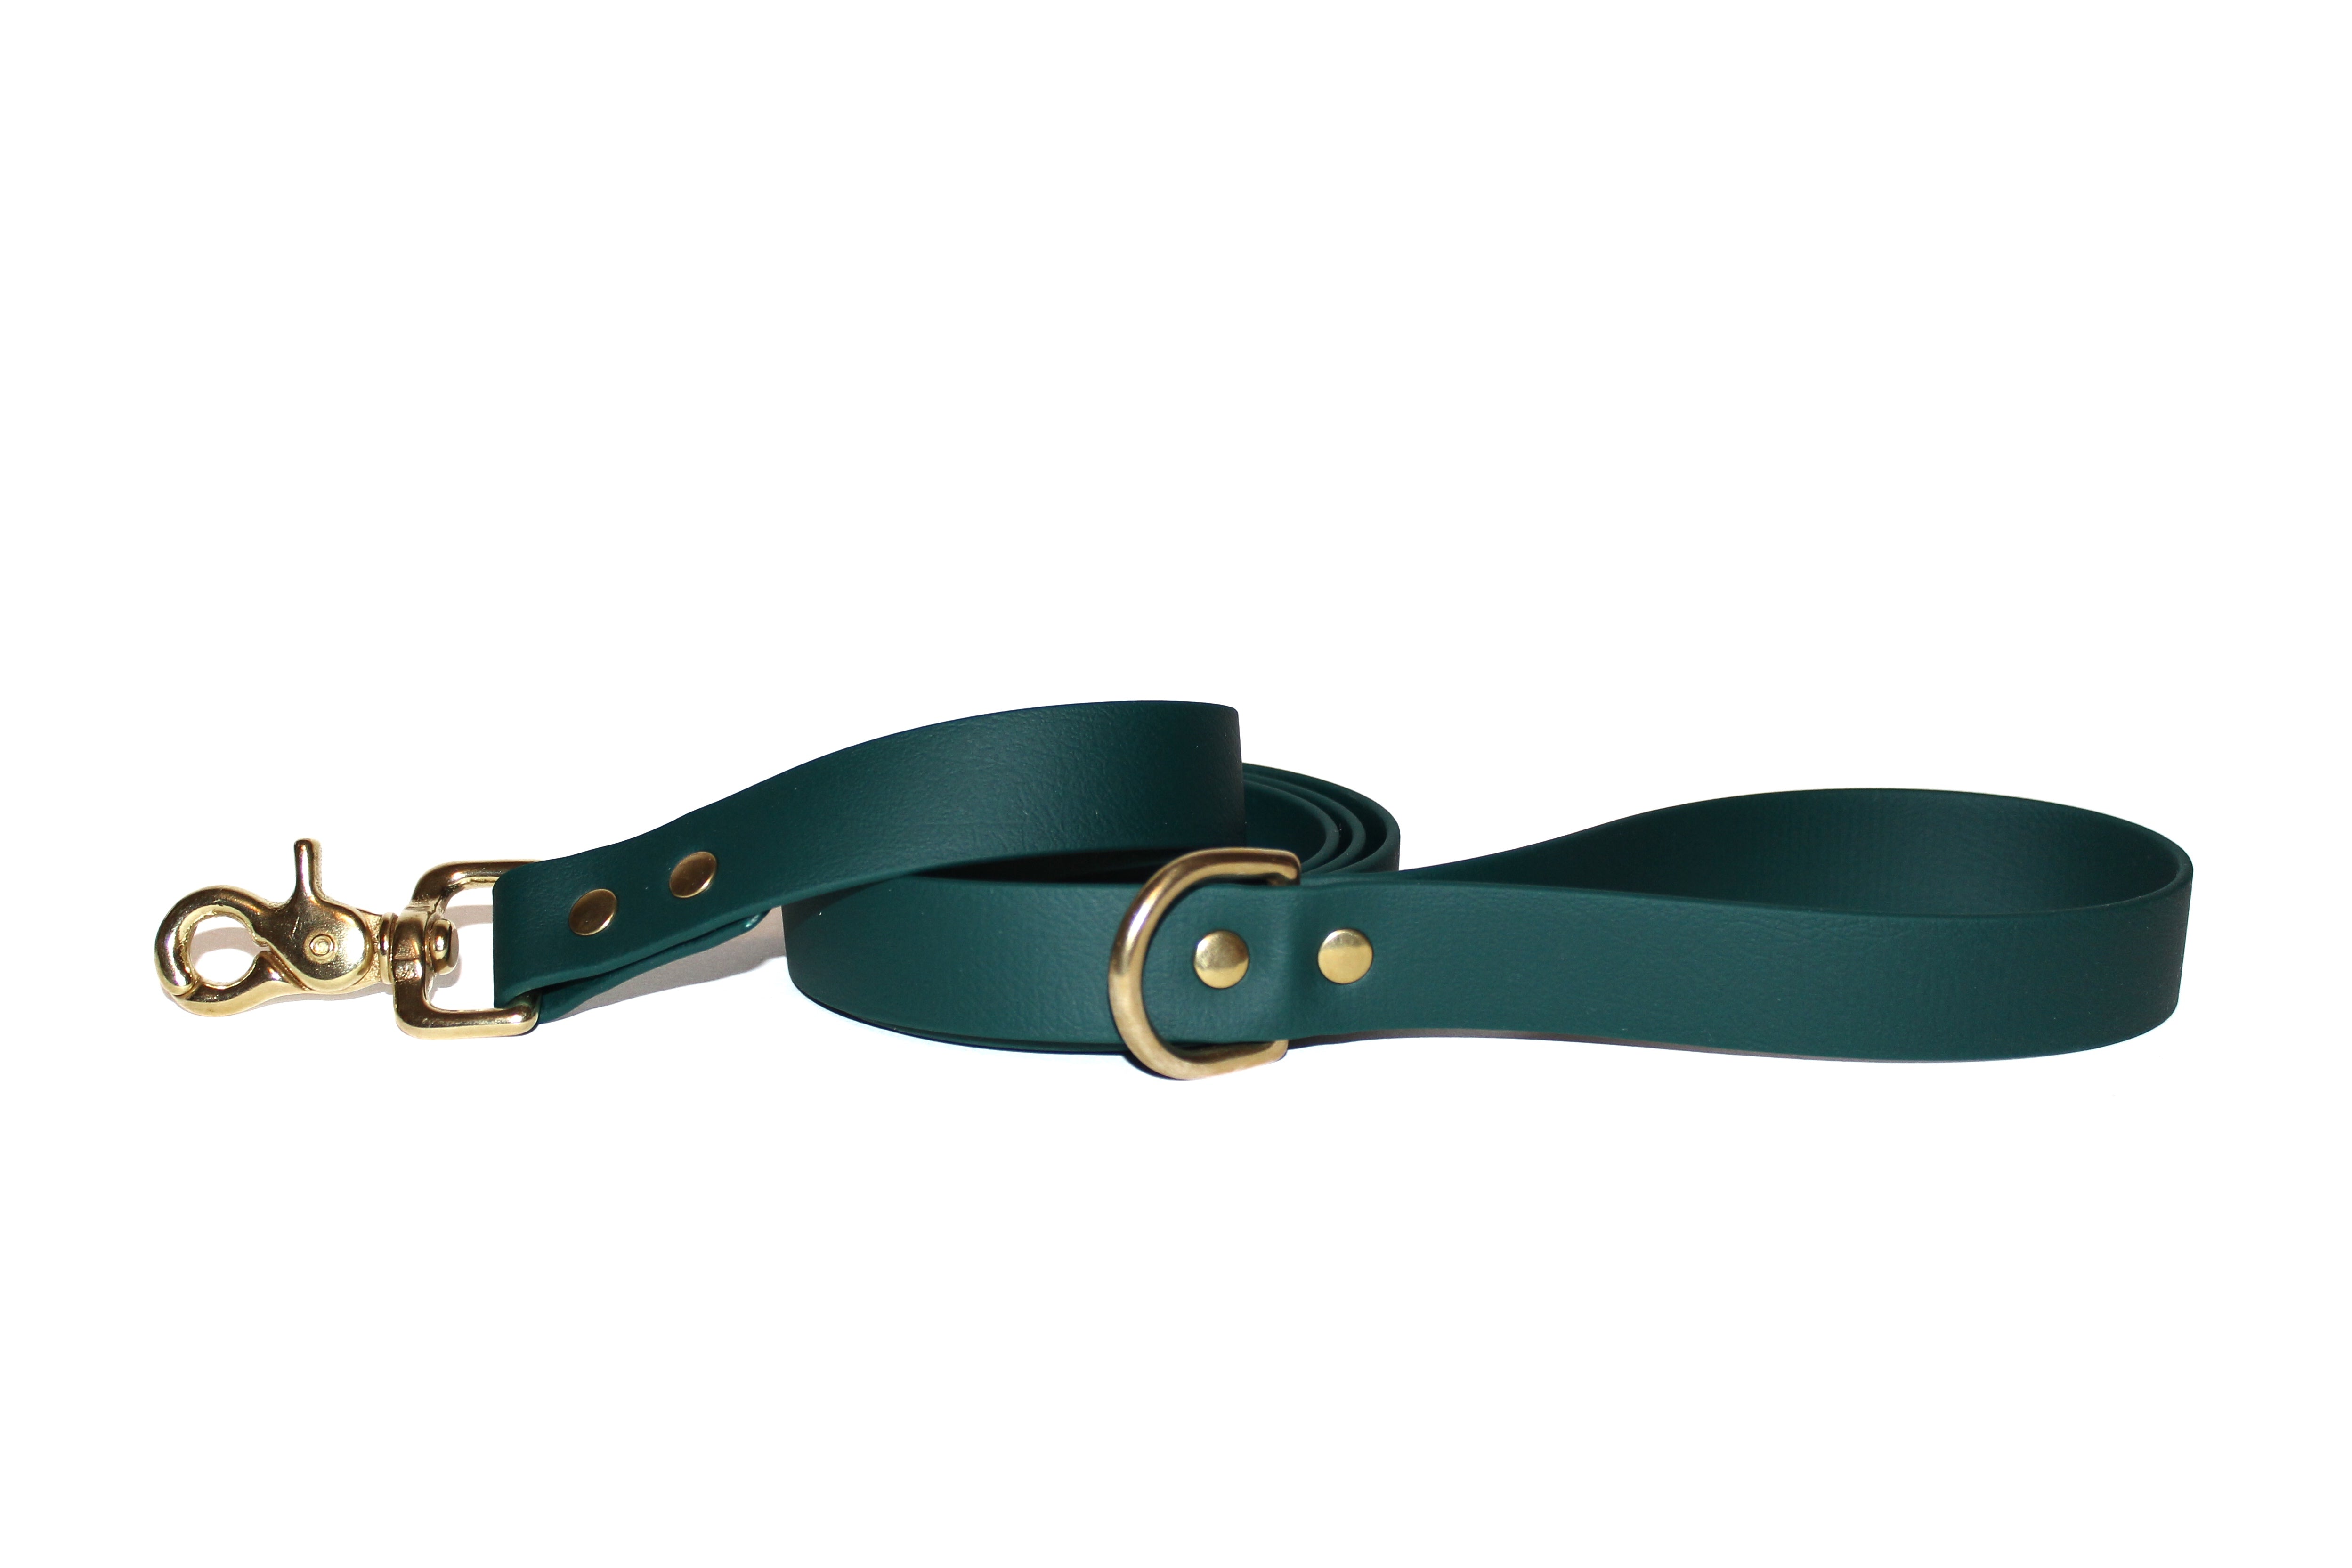 Leash Add-on • Length • Extra foot or two